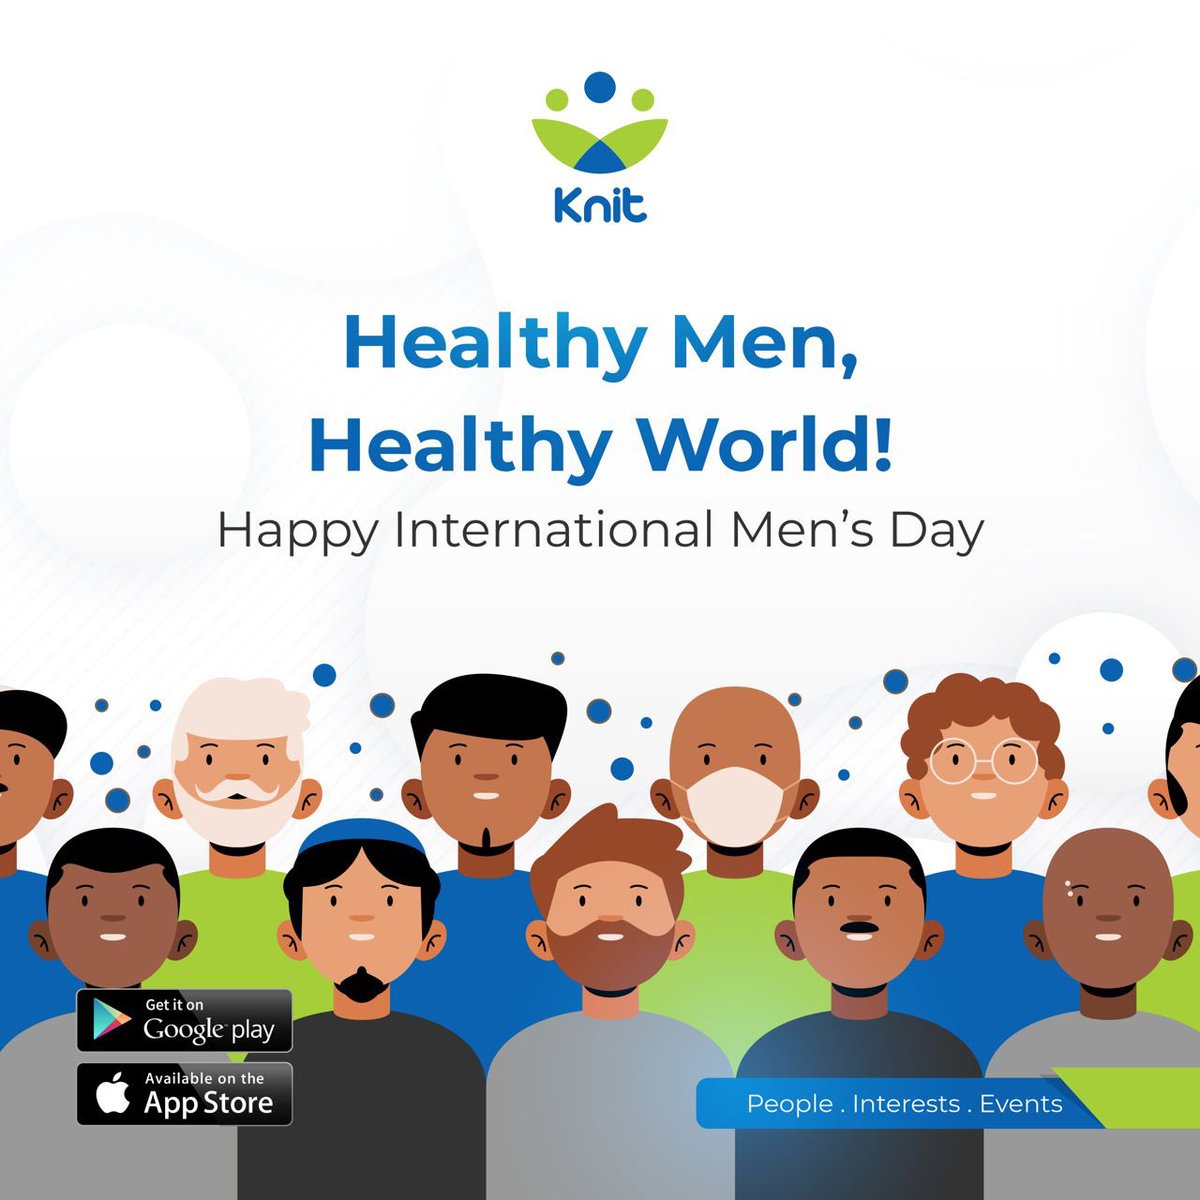 Happy International Men’s Day

Available for download on iOS and Android

• For iPhone Users: bit.ly/knitapp-ios

• For Android Users: bit.ly/theknitapp

#knit # events #business #promotions #knittechapp #eventlisting #facilities #experts #socialnetworking